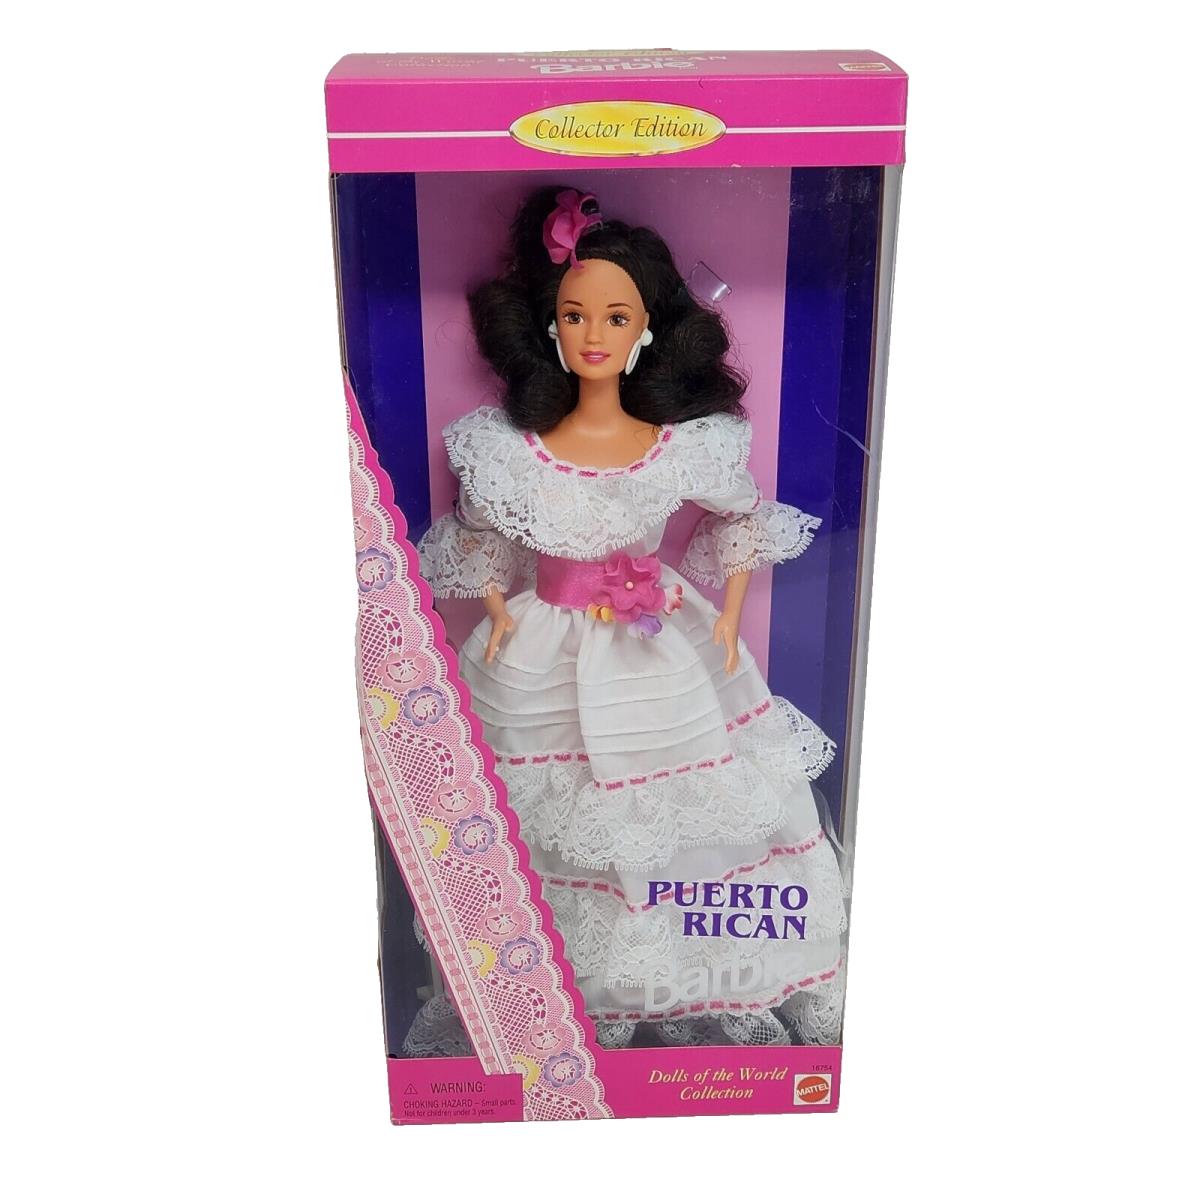 Vintage 1996 Puerto Rican Barbie Doll OF The World Box 16754